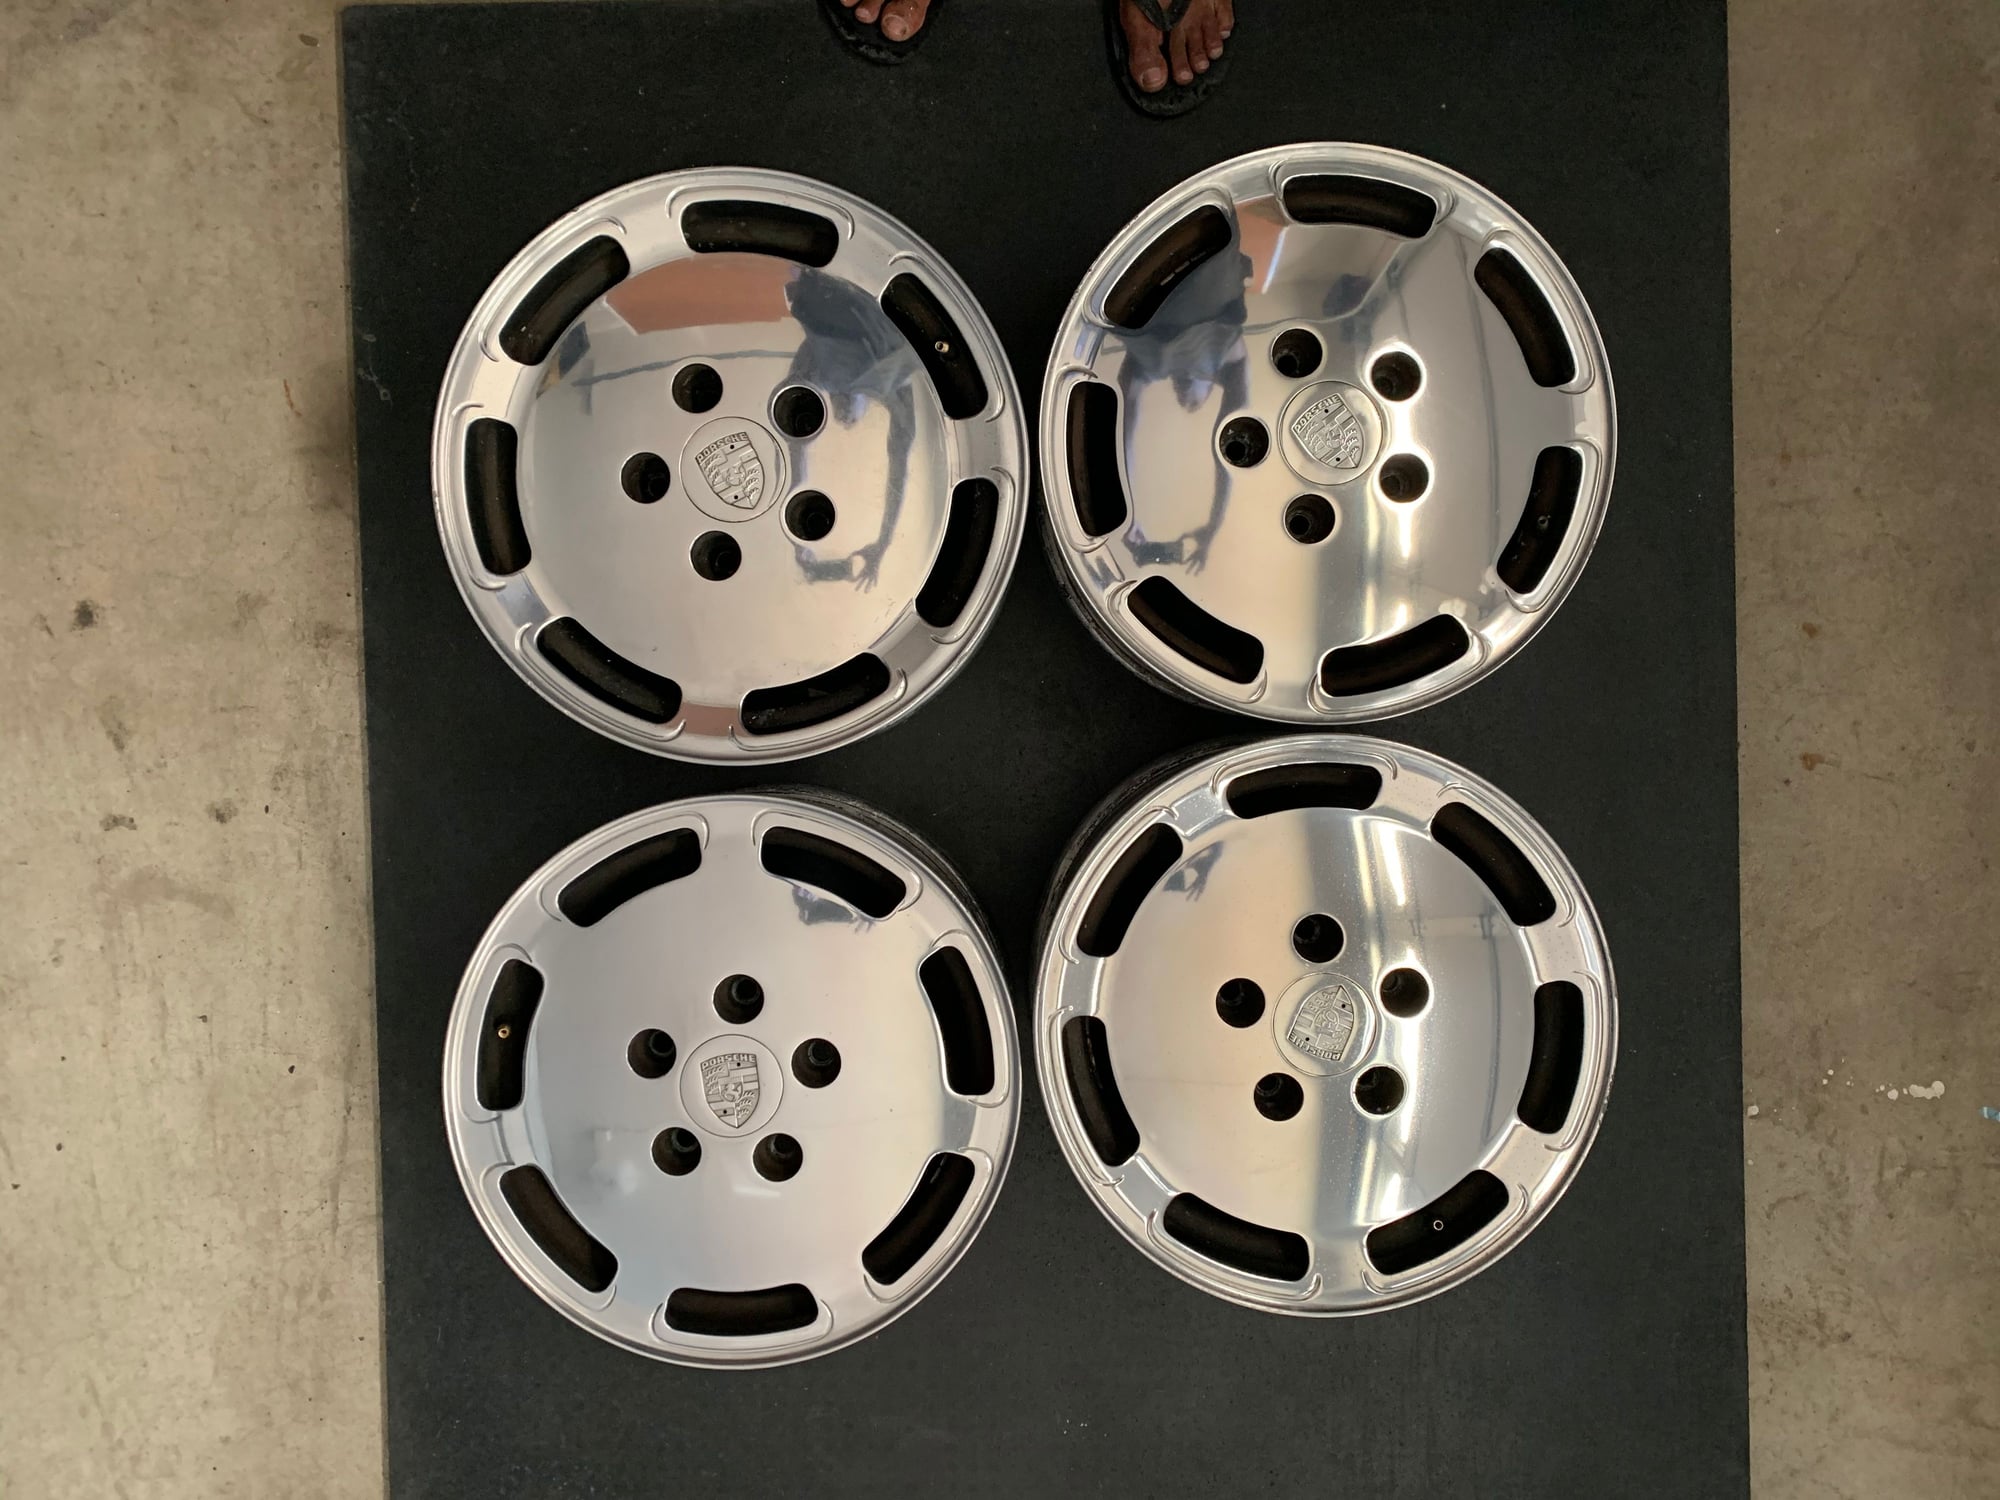 Wheels and Tires/Axles - FS: Porsche 928 S4 factory Wheels set great condition - Used - 1986 to 1995 Porsche 928 - San Diego, CA 92129, United States